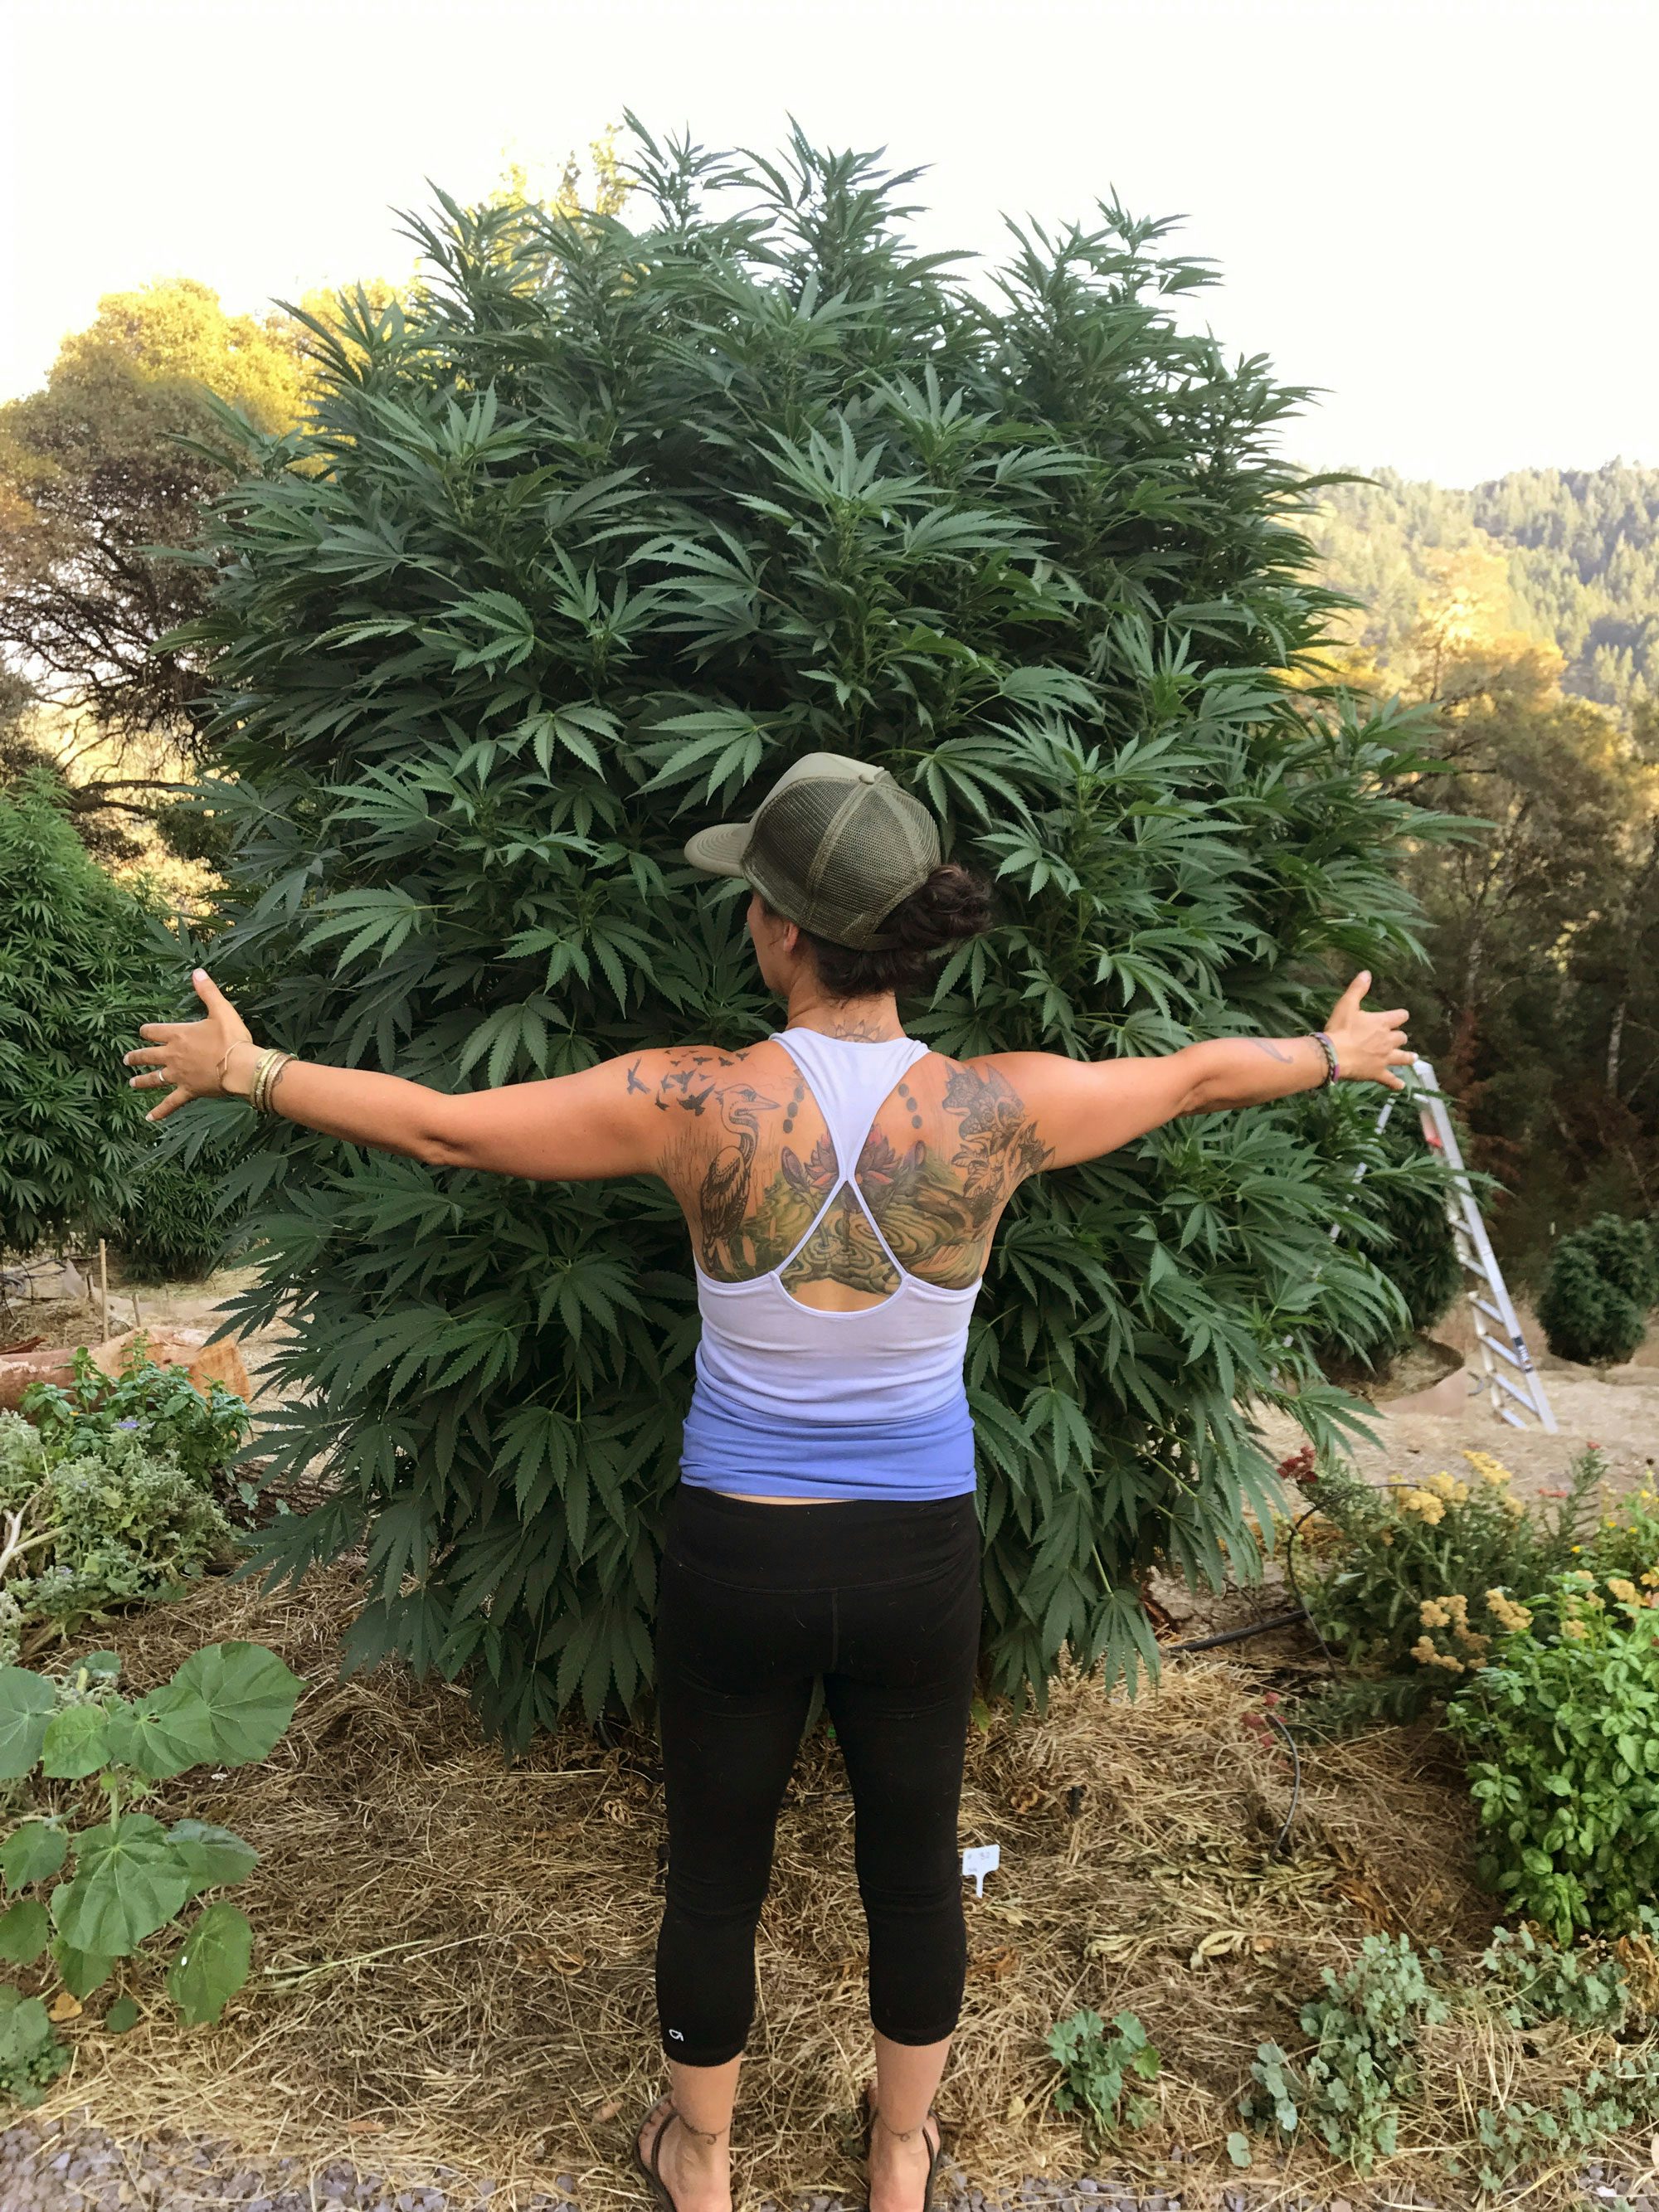 What Its Like To Be Married To A Cannabis Farmer In Humboldt 2 Study Confirms That Alcohol And Tobacco Are Way More Dangerous Than Cannabis